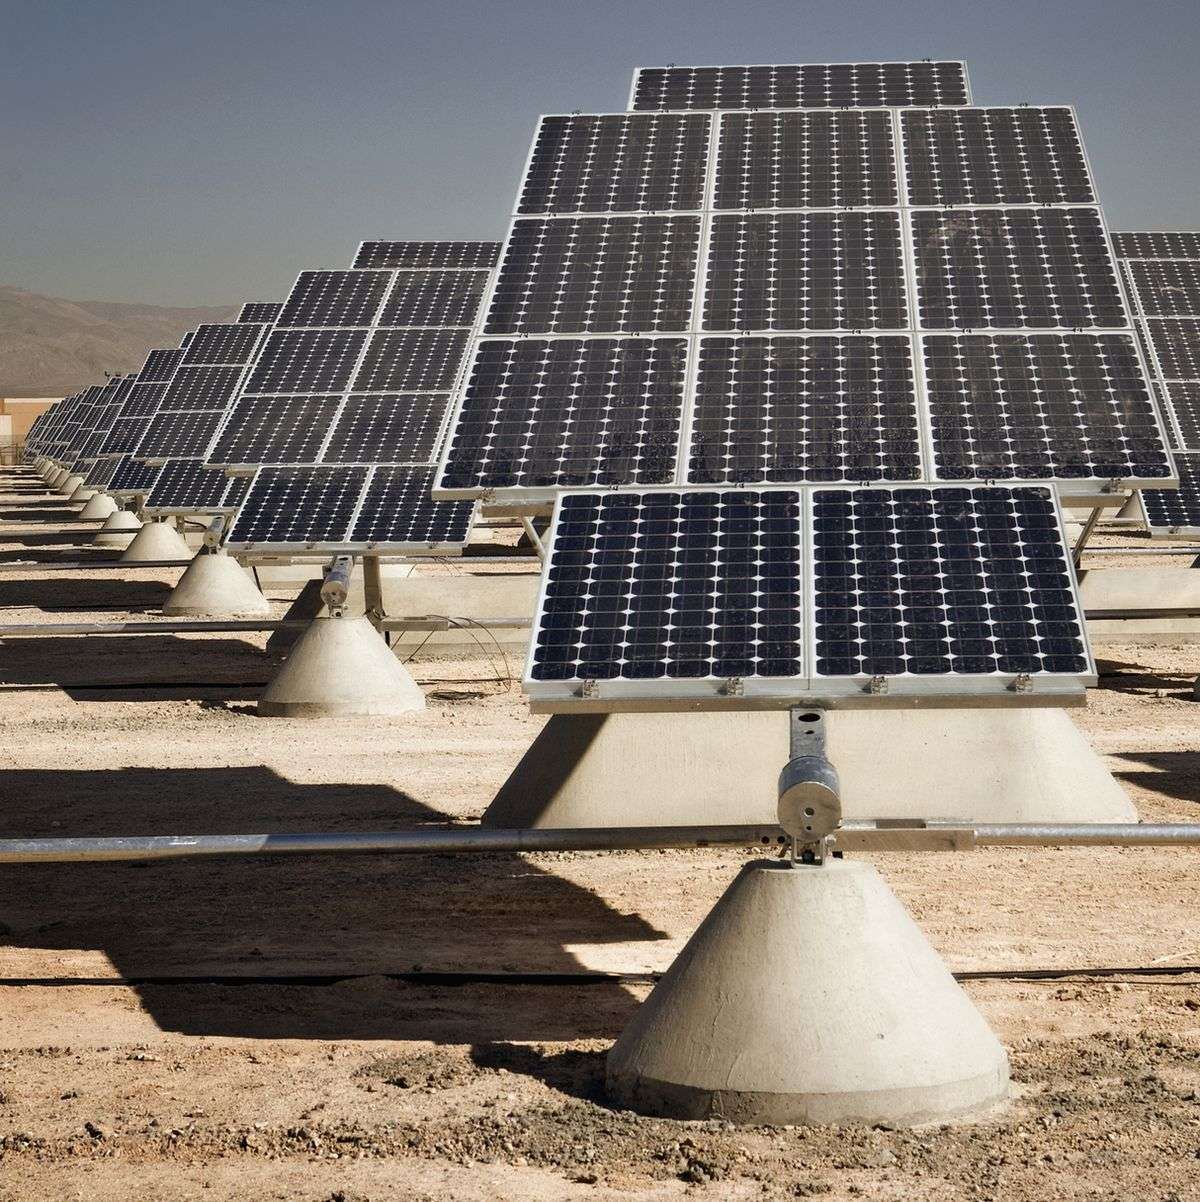 Solar panels mounted in a solar farm provide sustainable advances in solar energy.